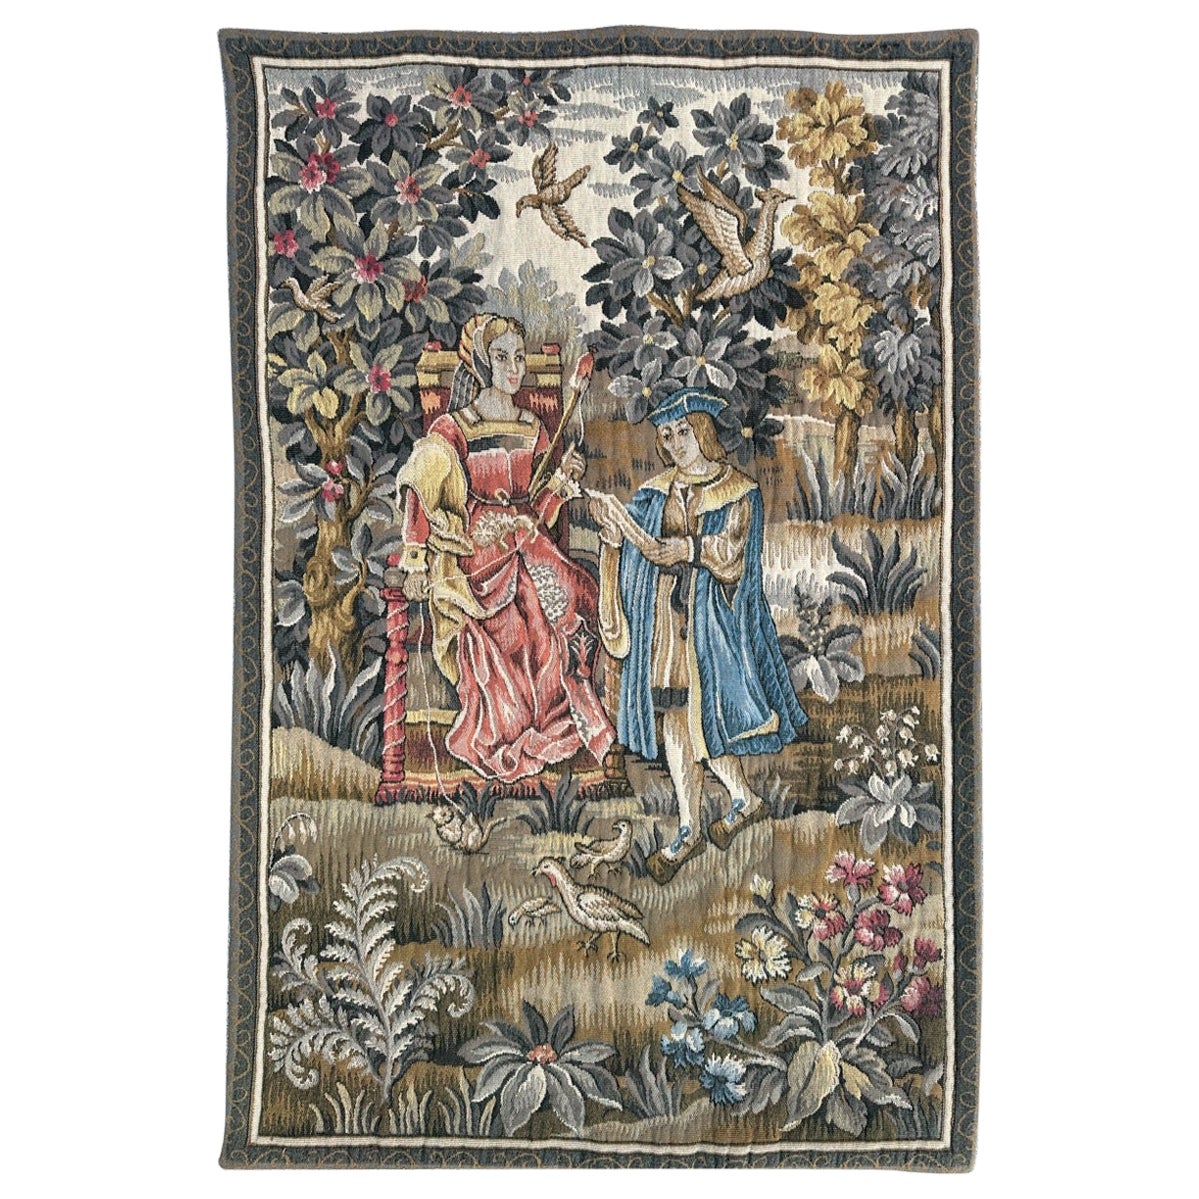 Bobyrug's Nice French Jaquar Tapestry Medieval Aubusson Style Design